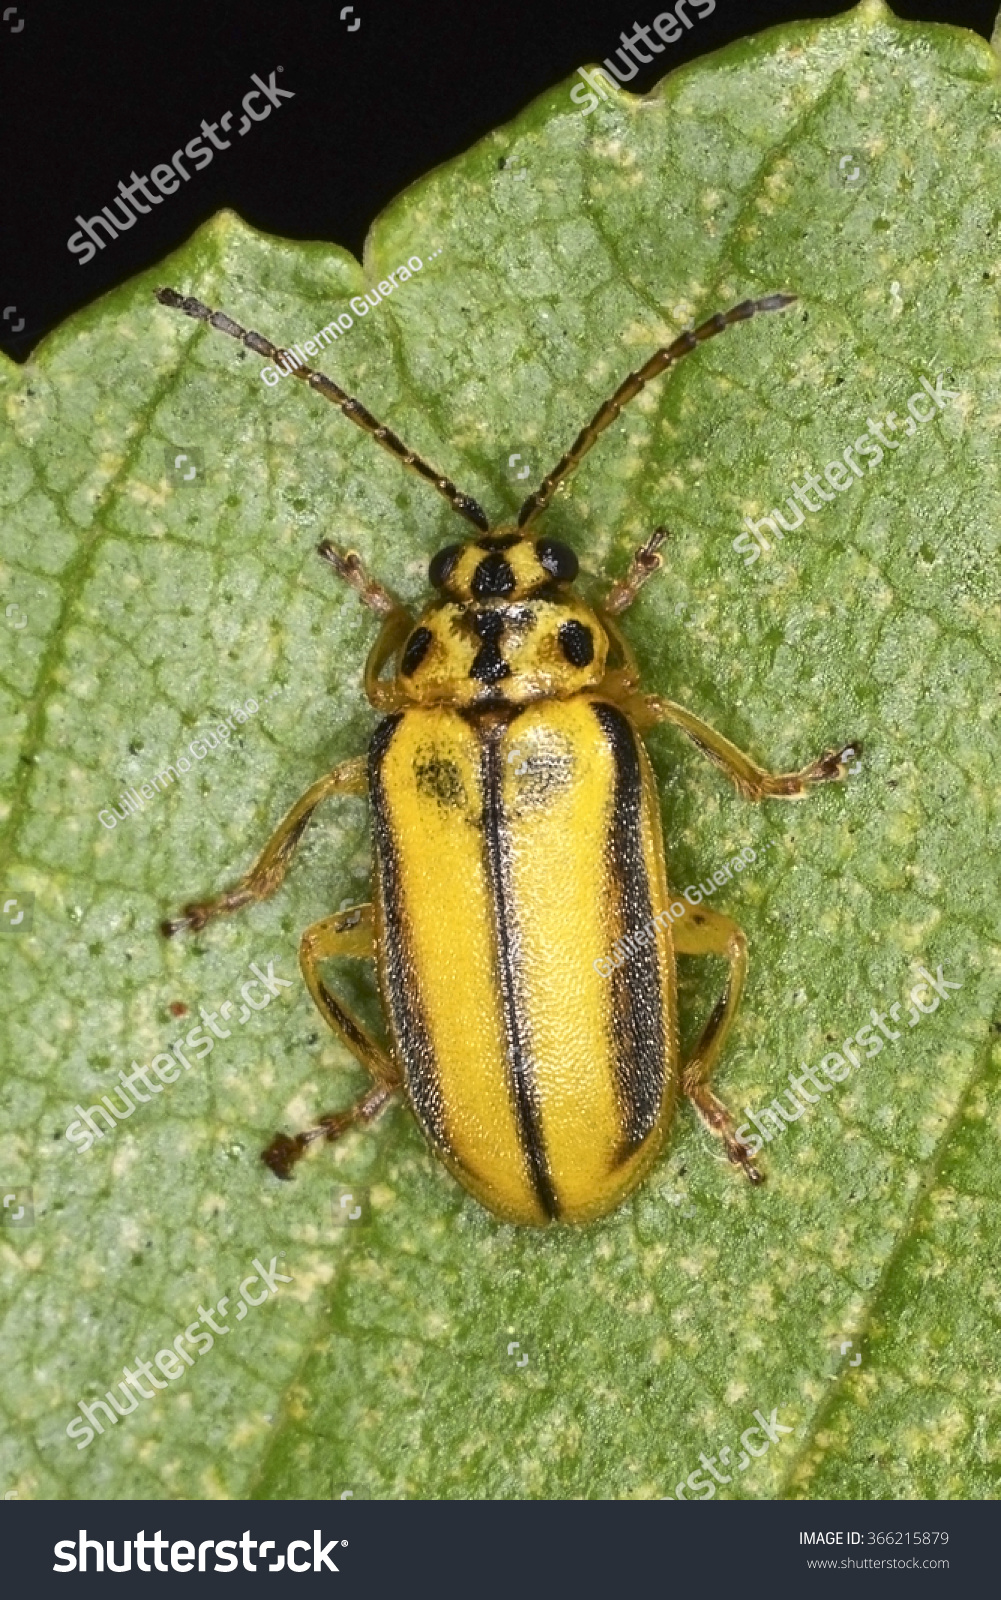 Xanthogaleruca luteola (the elm-leaf beetle), an invasive beetle pest species in the family Chrysomelidae. #366215879